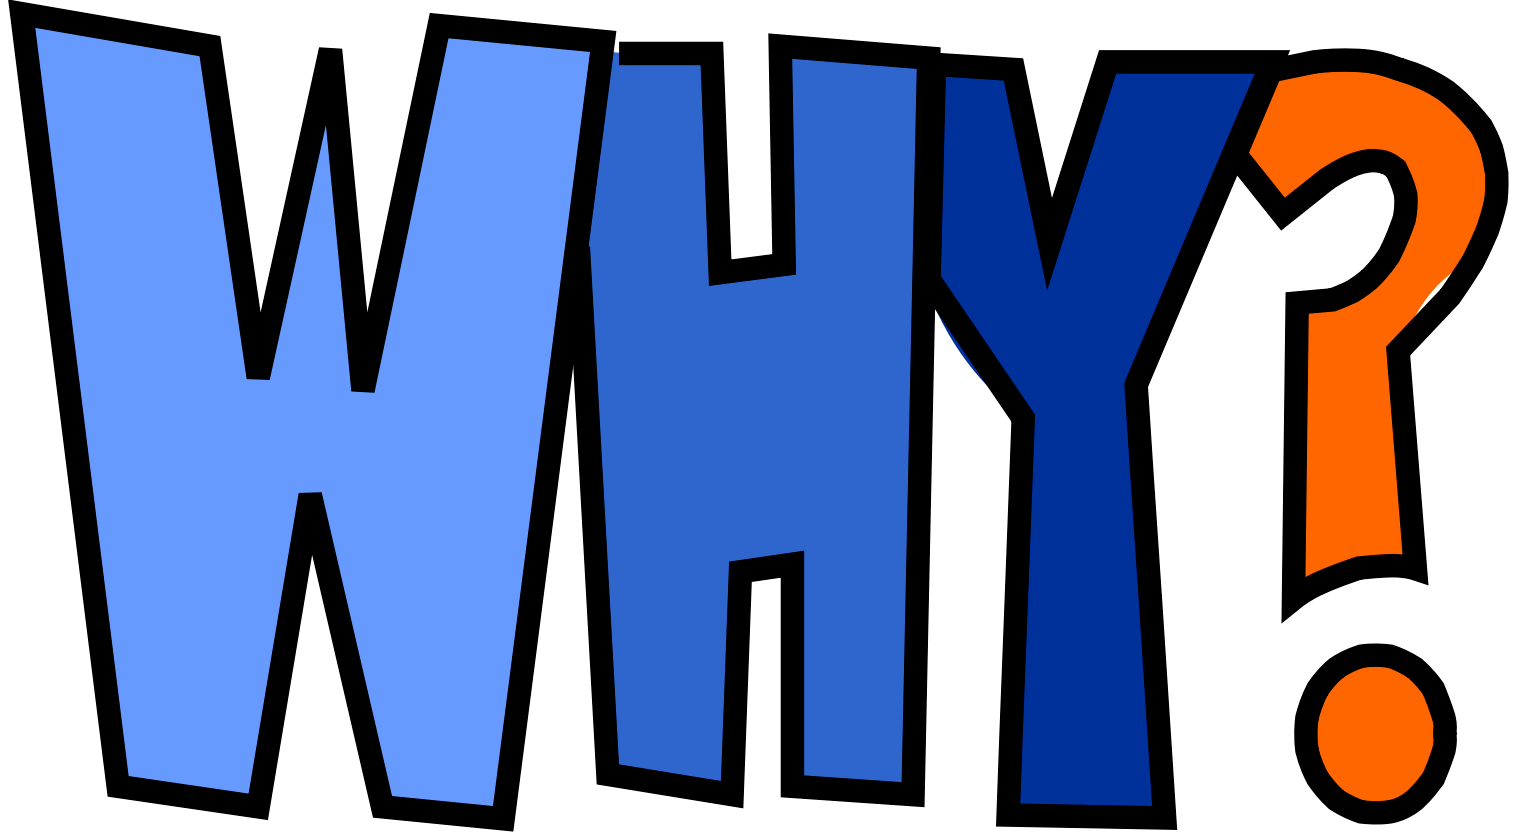 The word "why" in capitals, with a blue gradient getting darkest on "y".  An orange question mark.